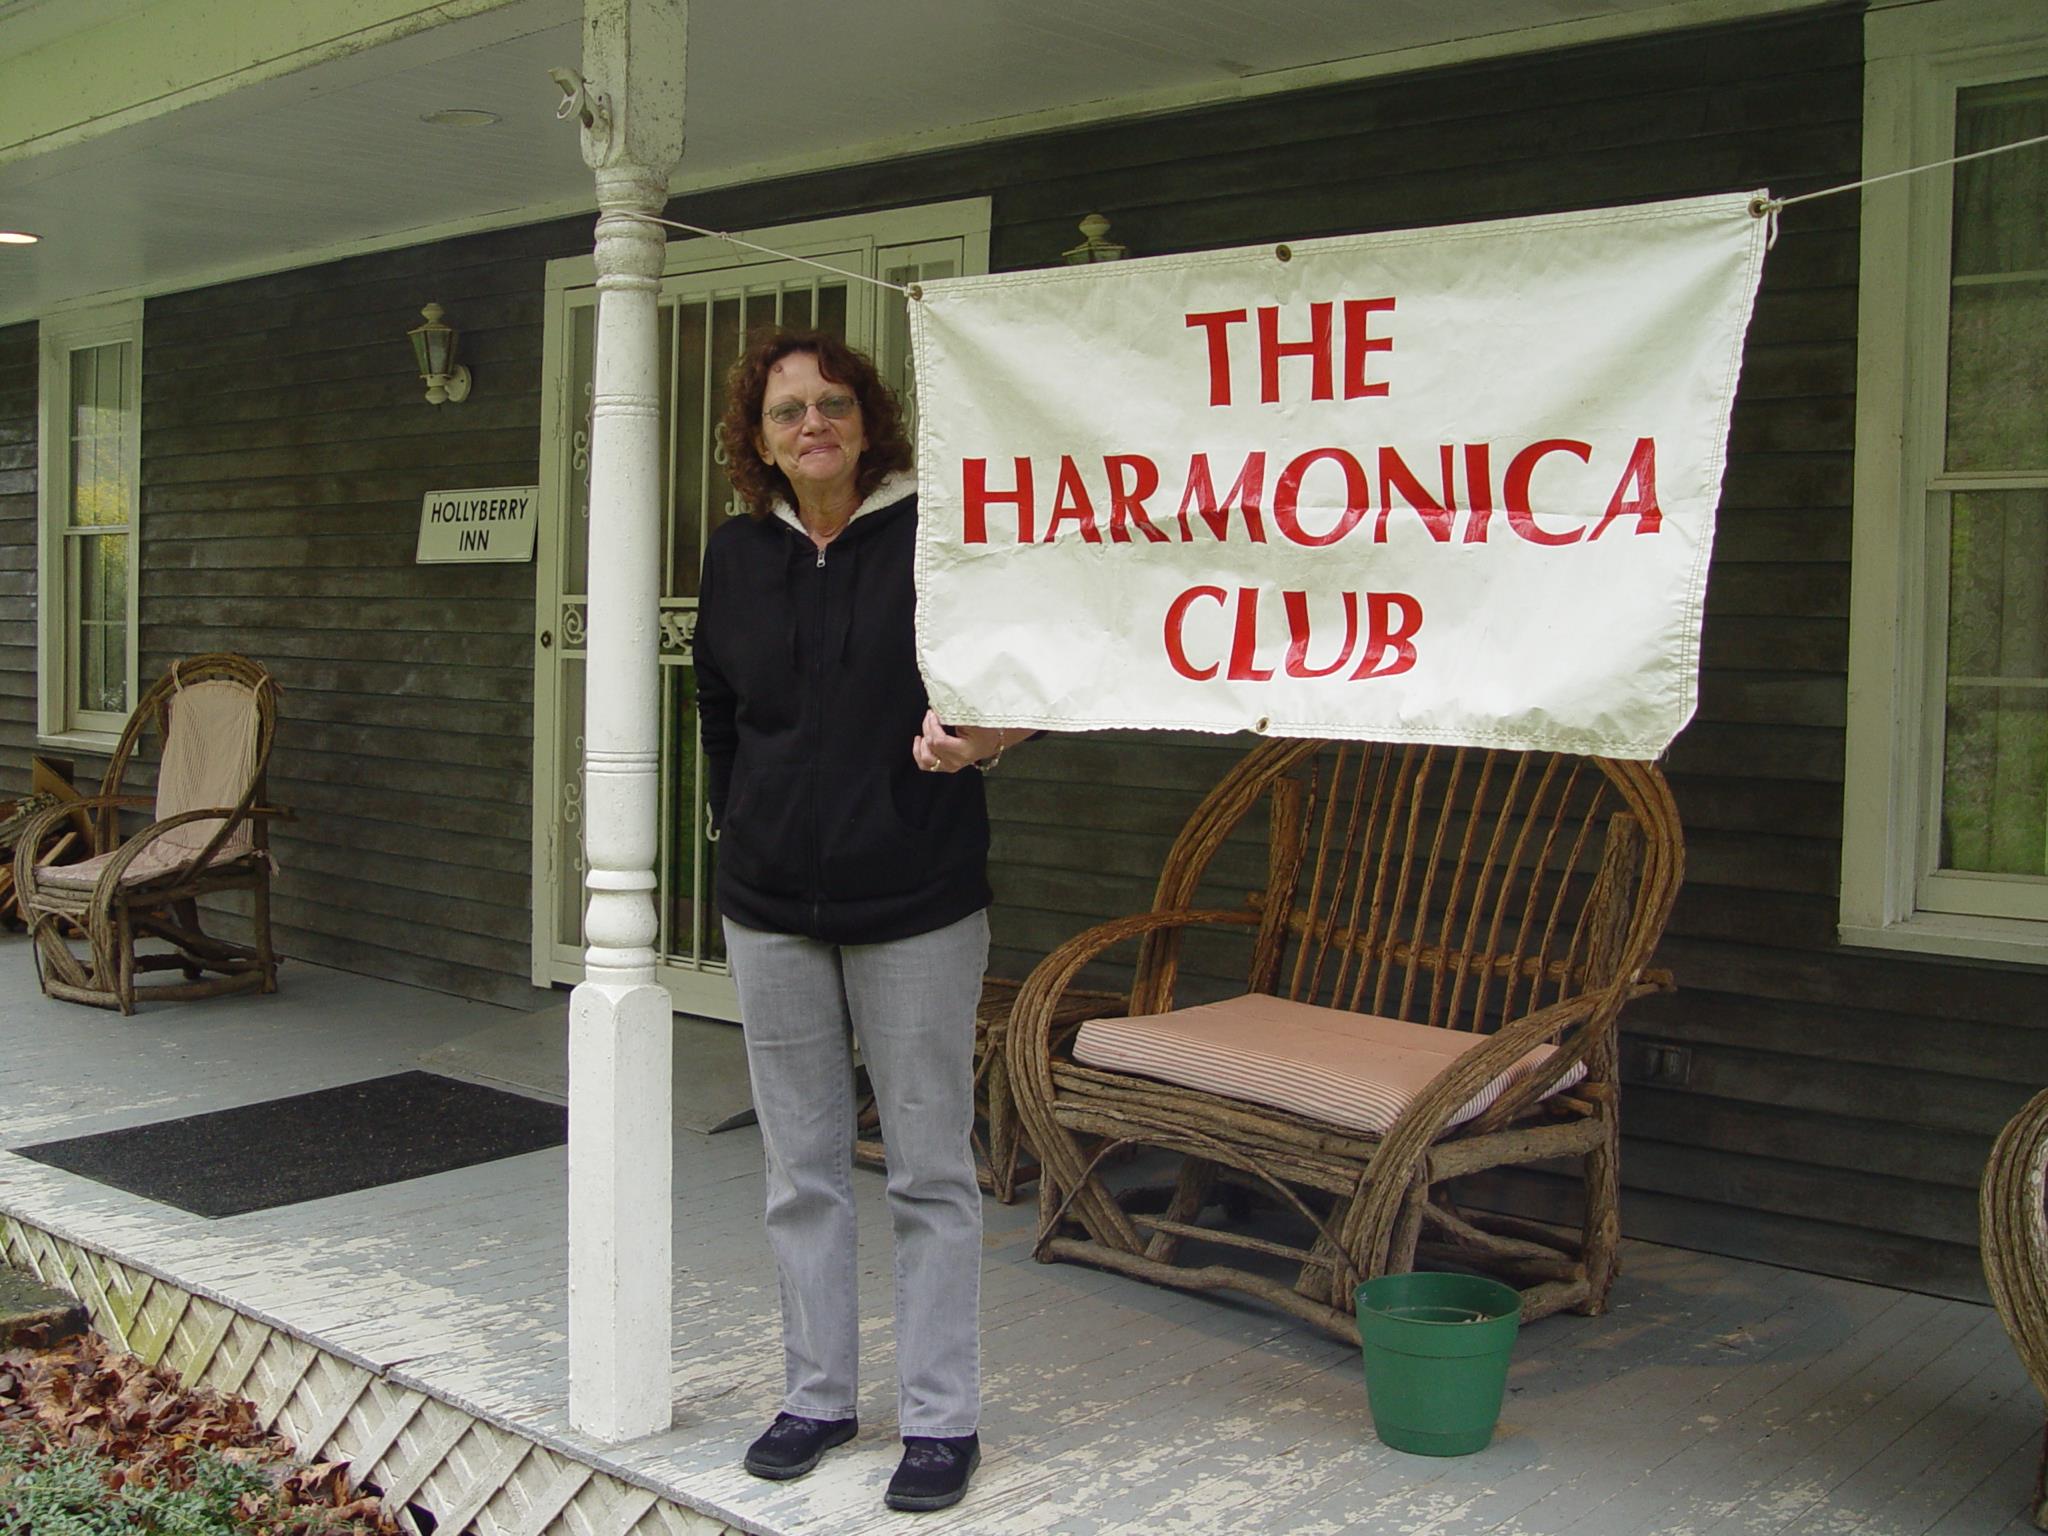 when you see the HAMONICA CLUB sign, you know your'e there